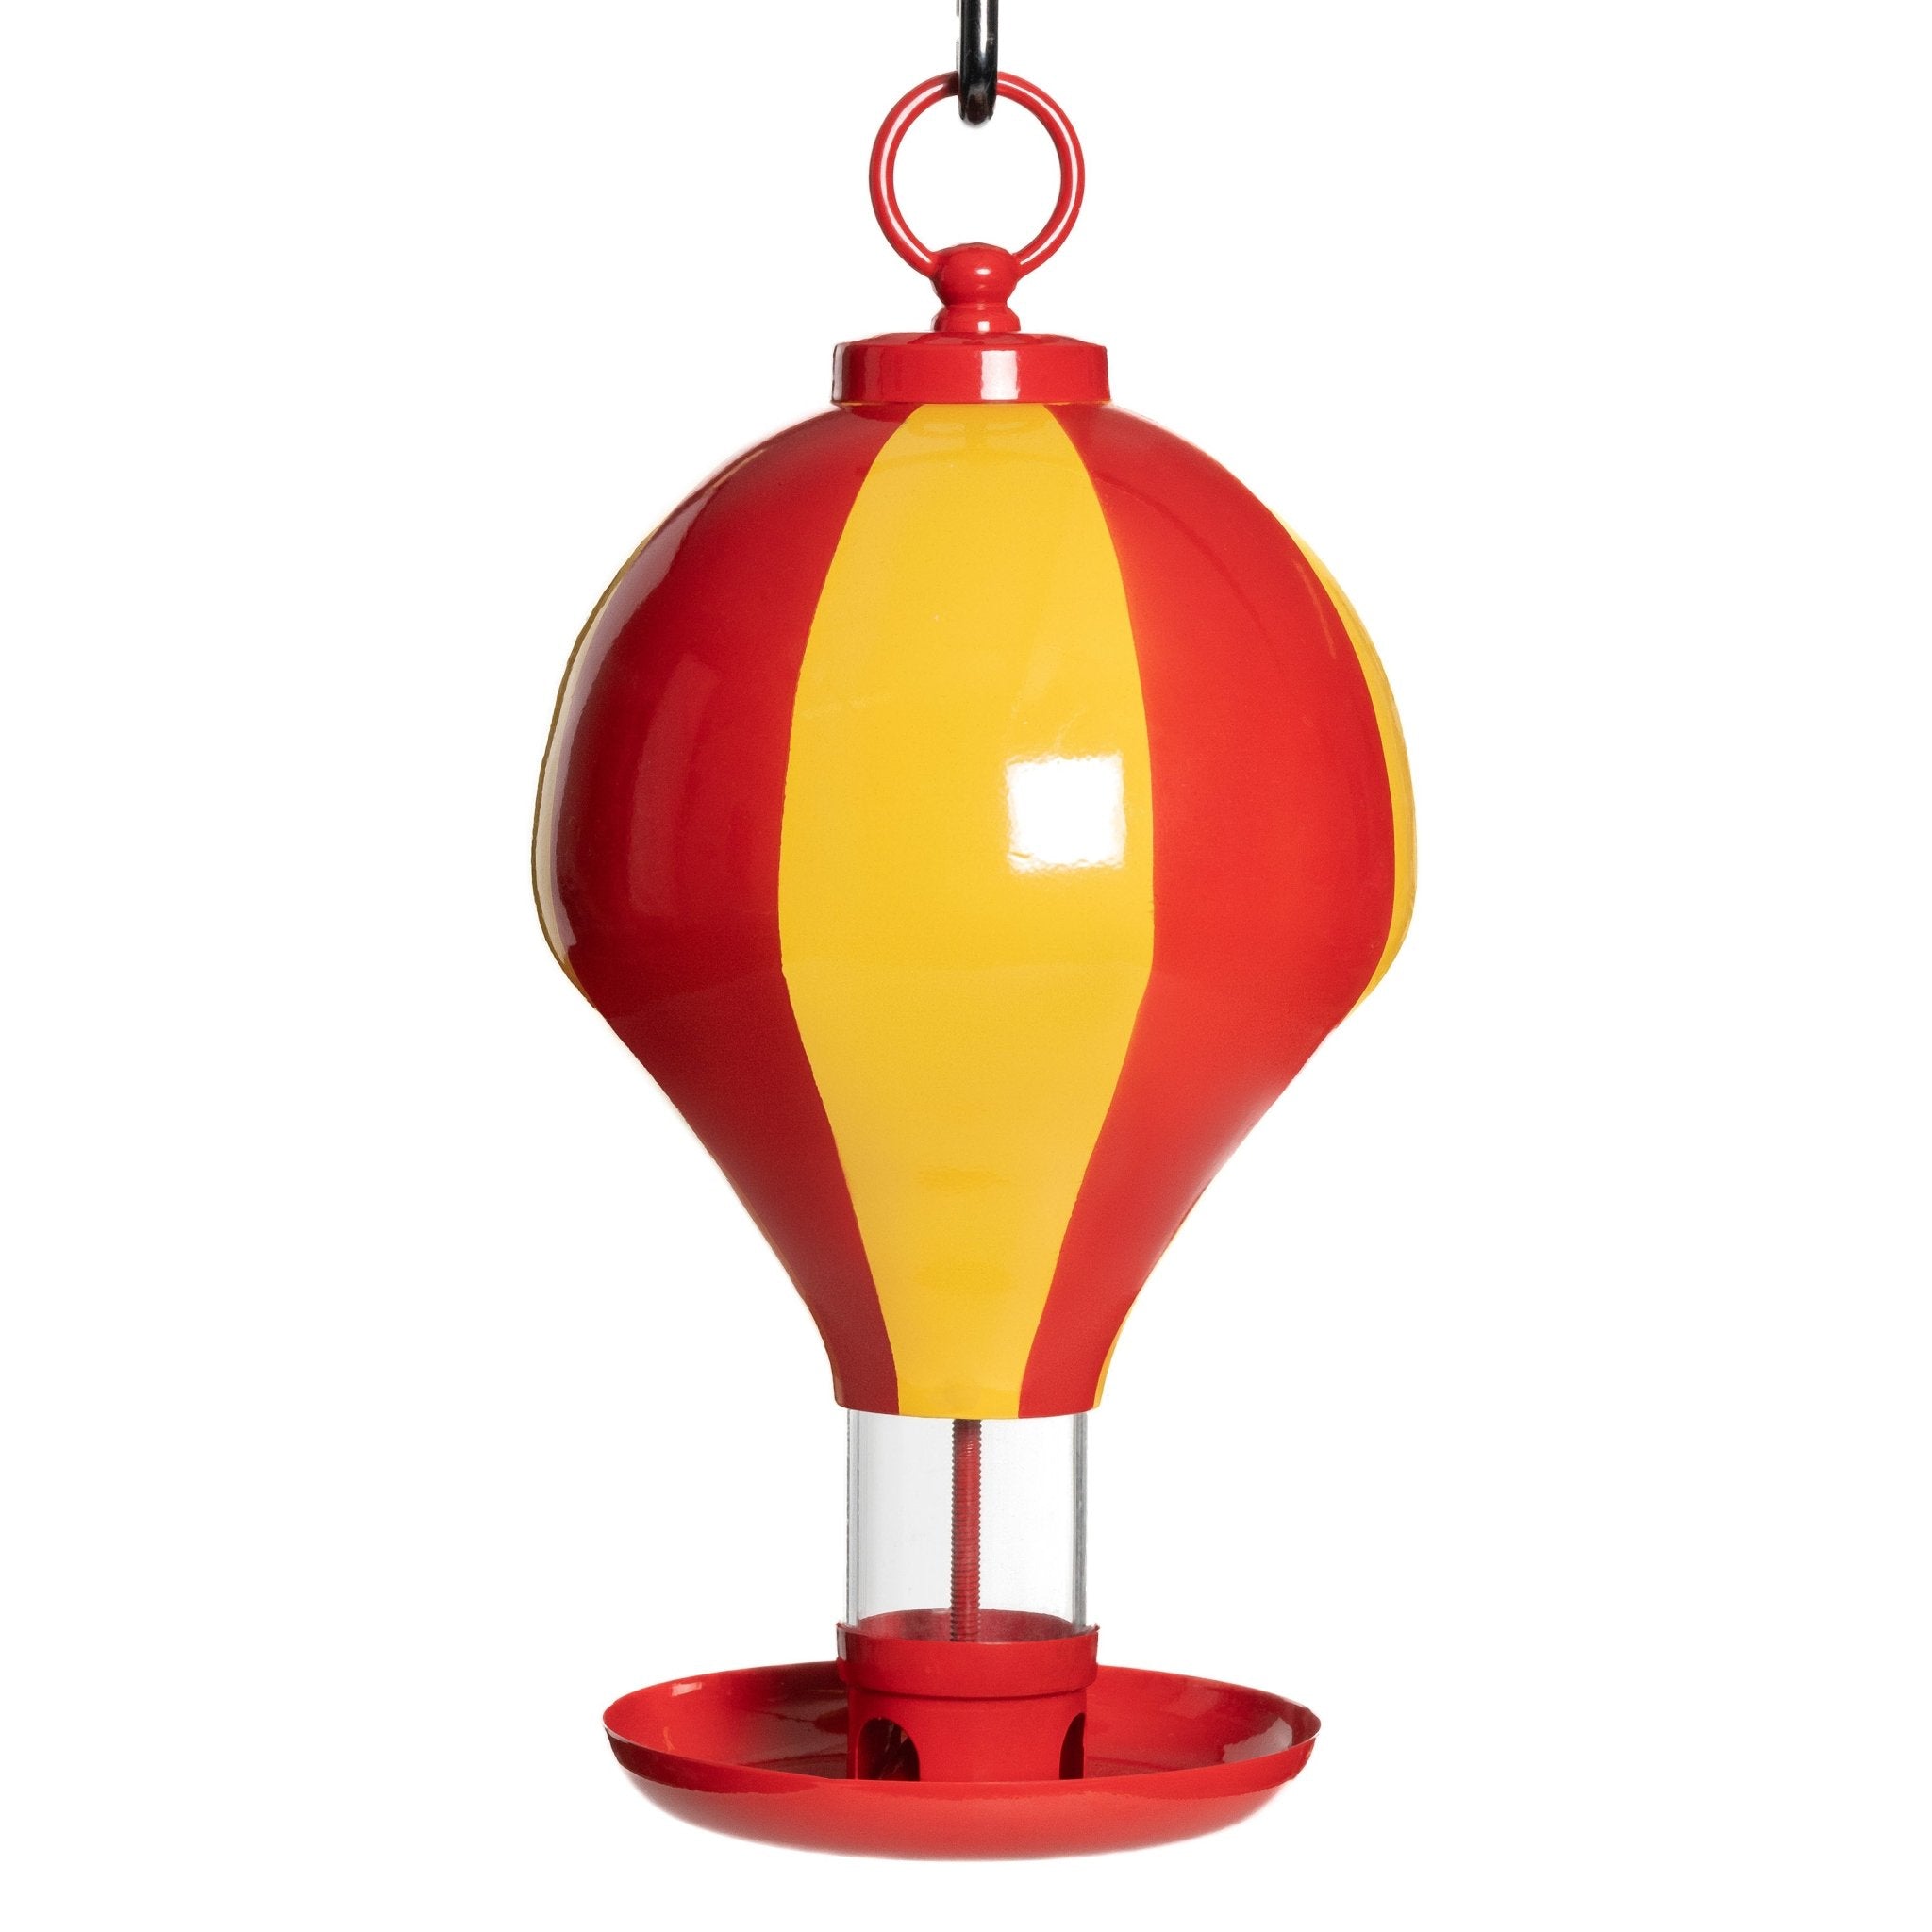 Up, Up & Away Bird Feeder, Unique and Colorful Hot Air Balloon Design - Good Directions